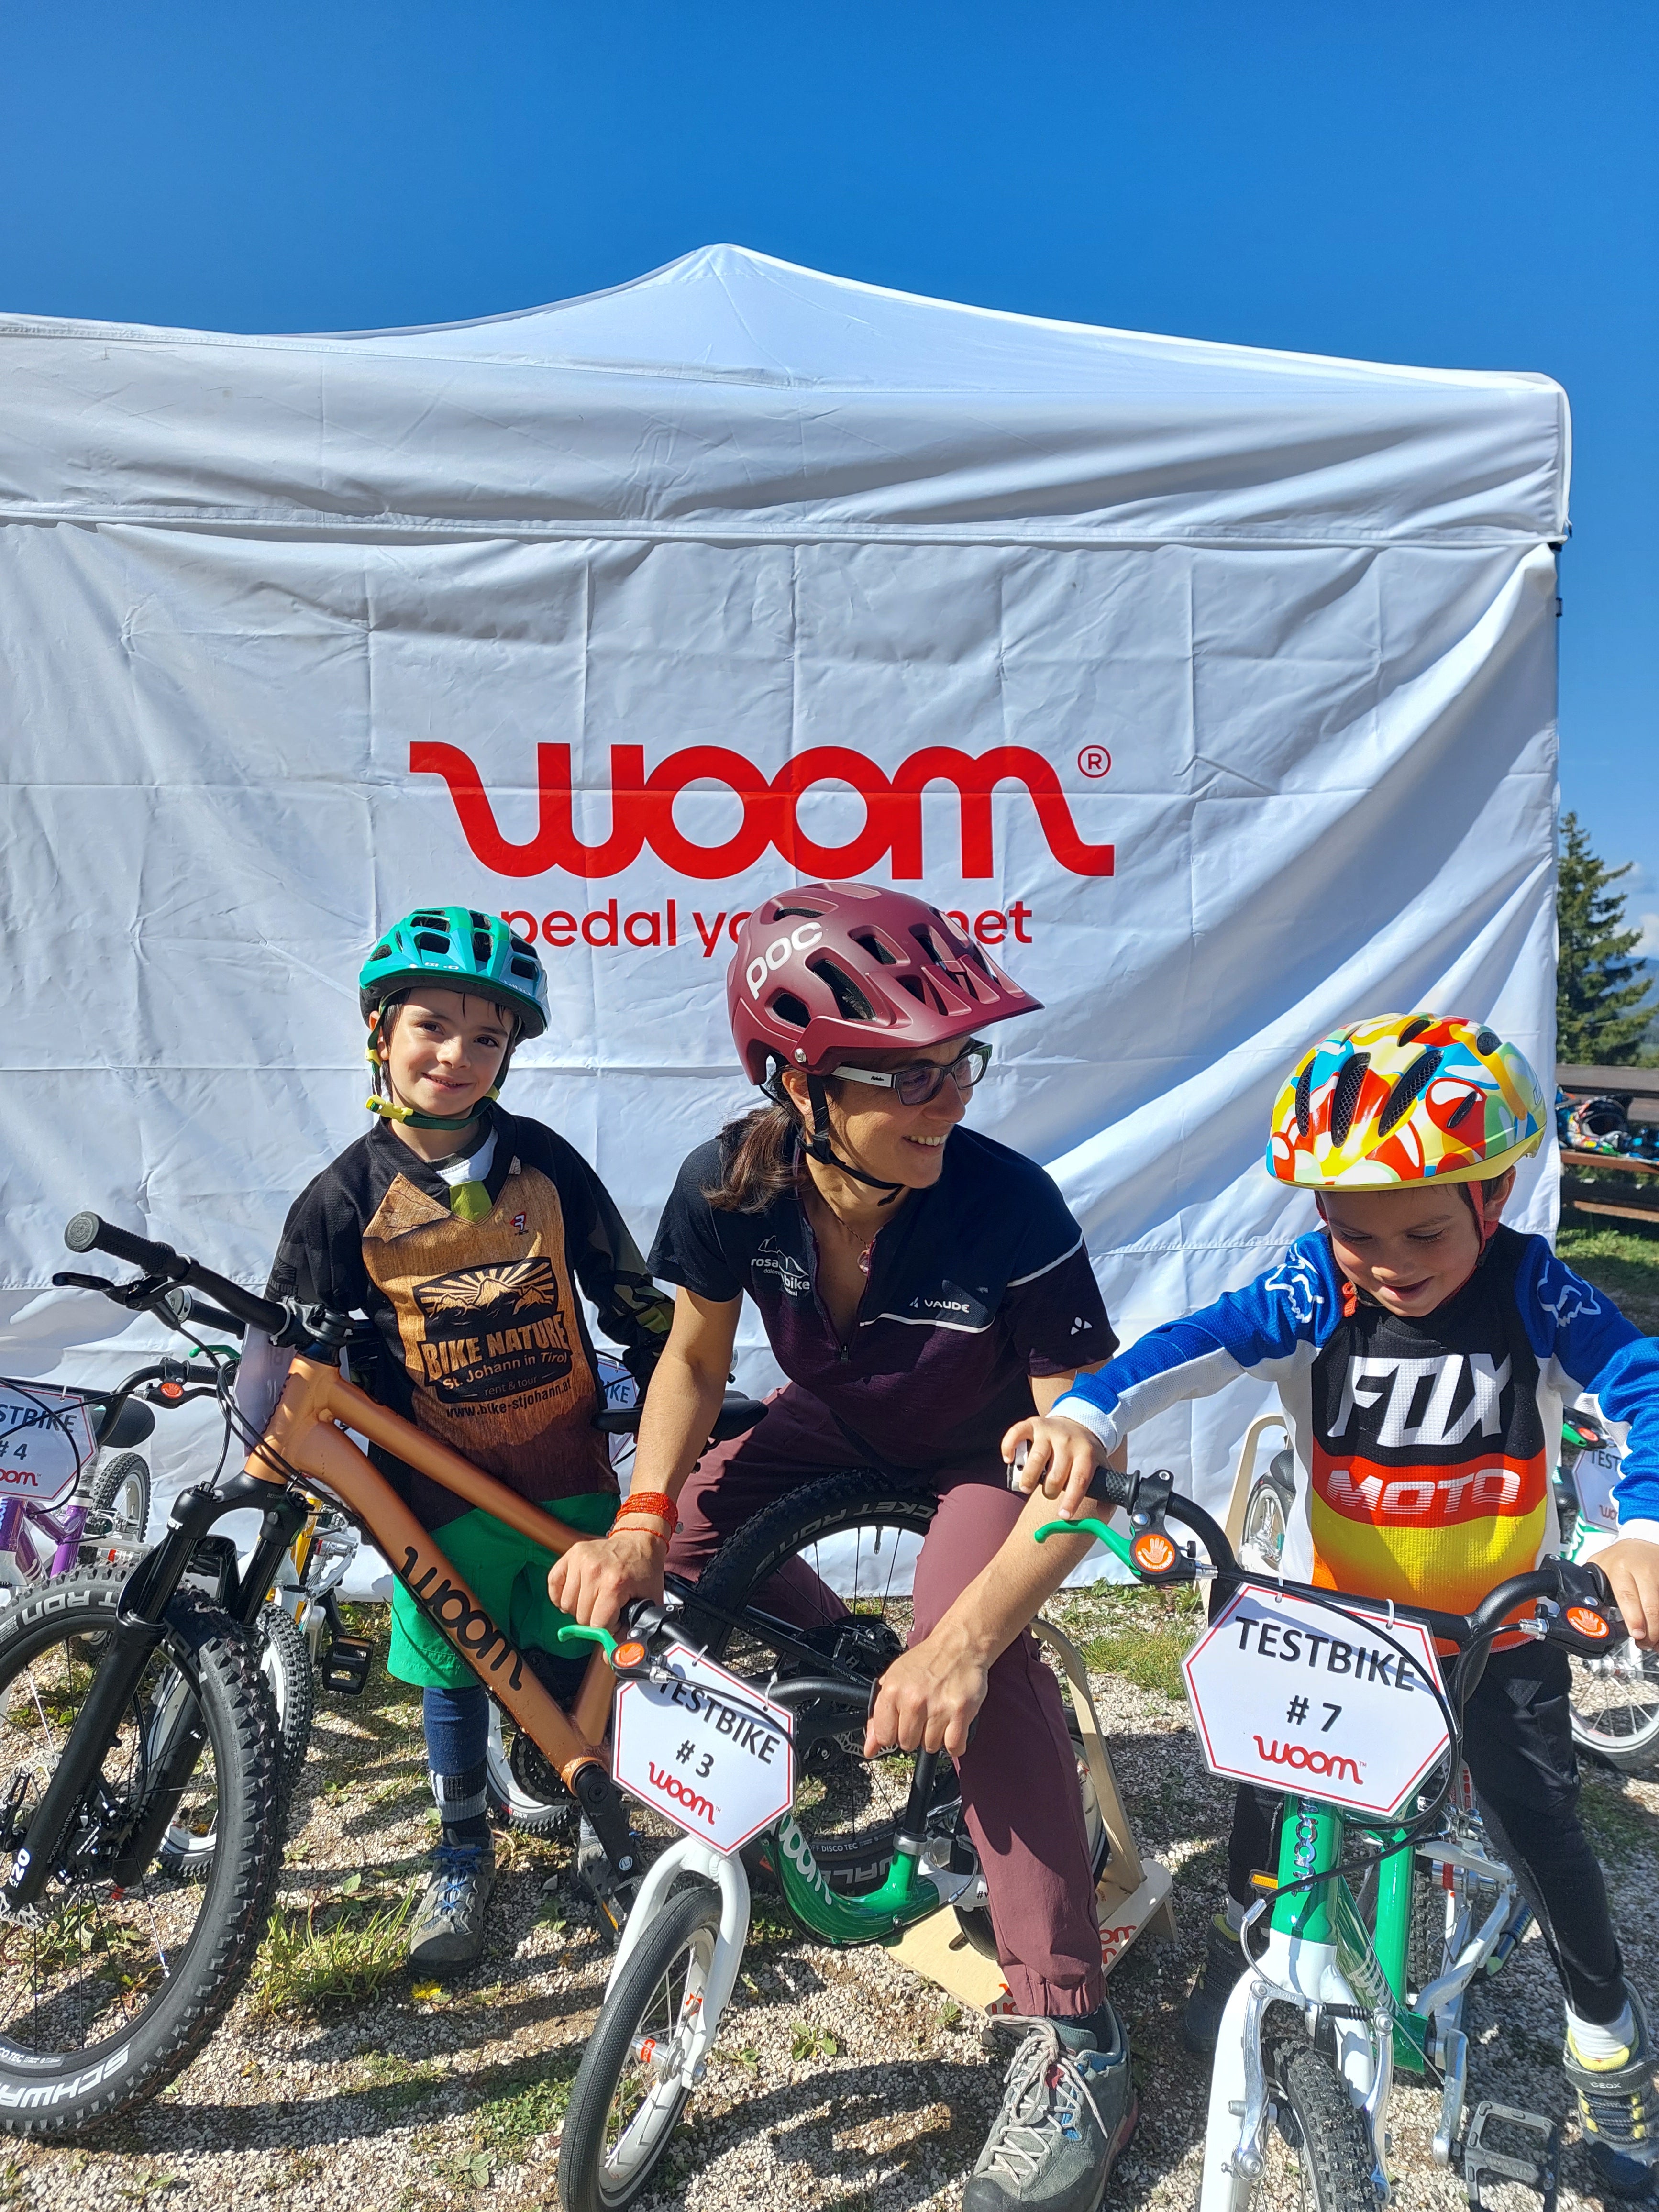 A mother poses on a woom balance bike, with her two sons either side also on woom bikes.